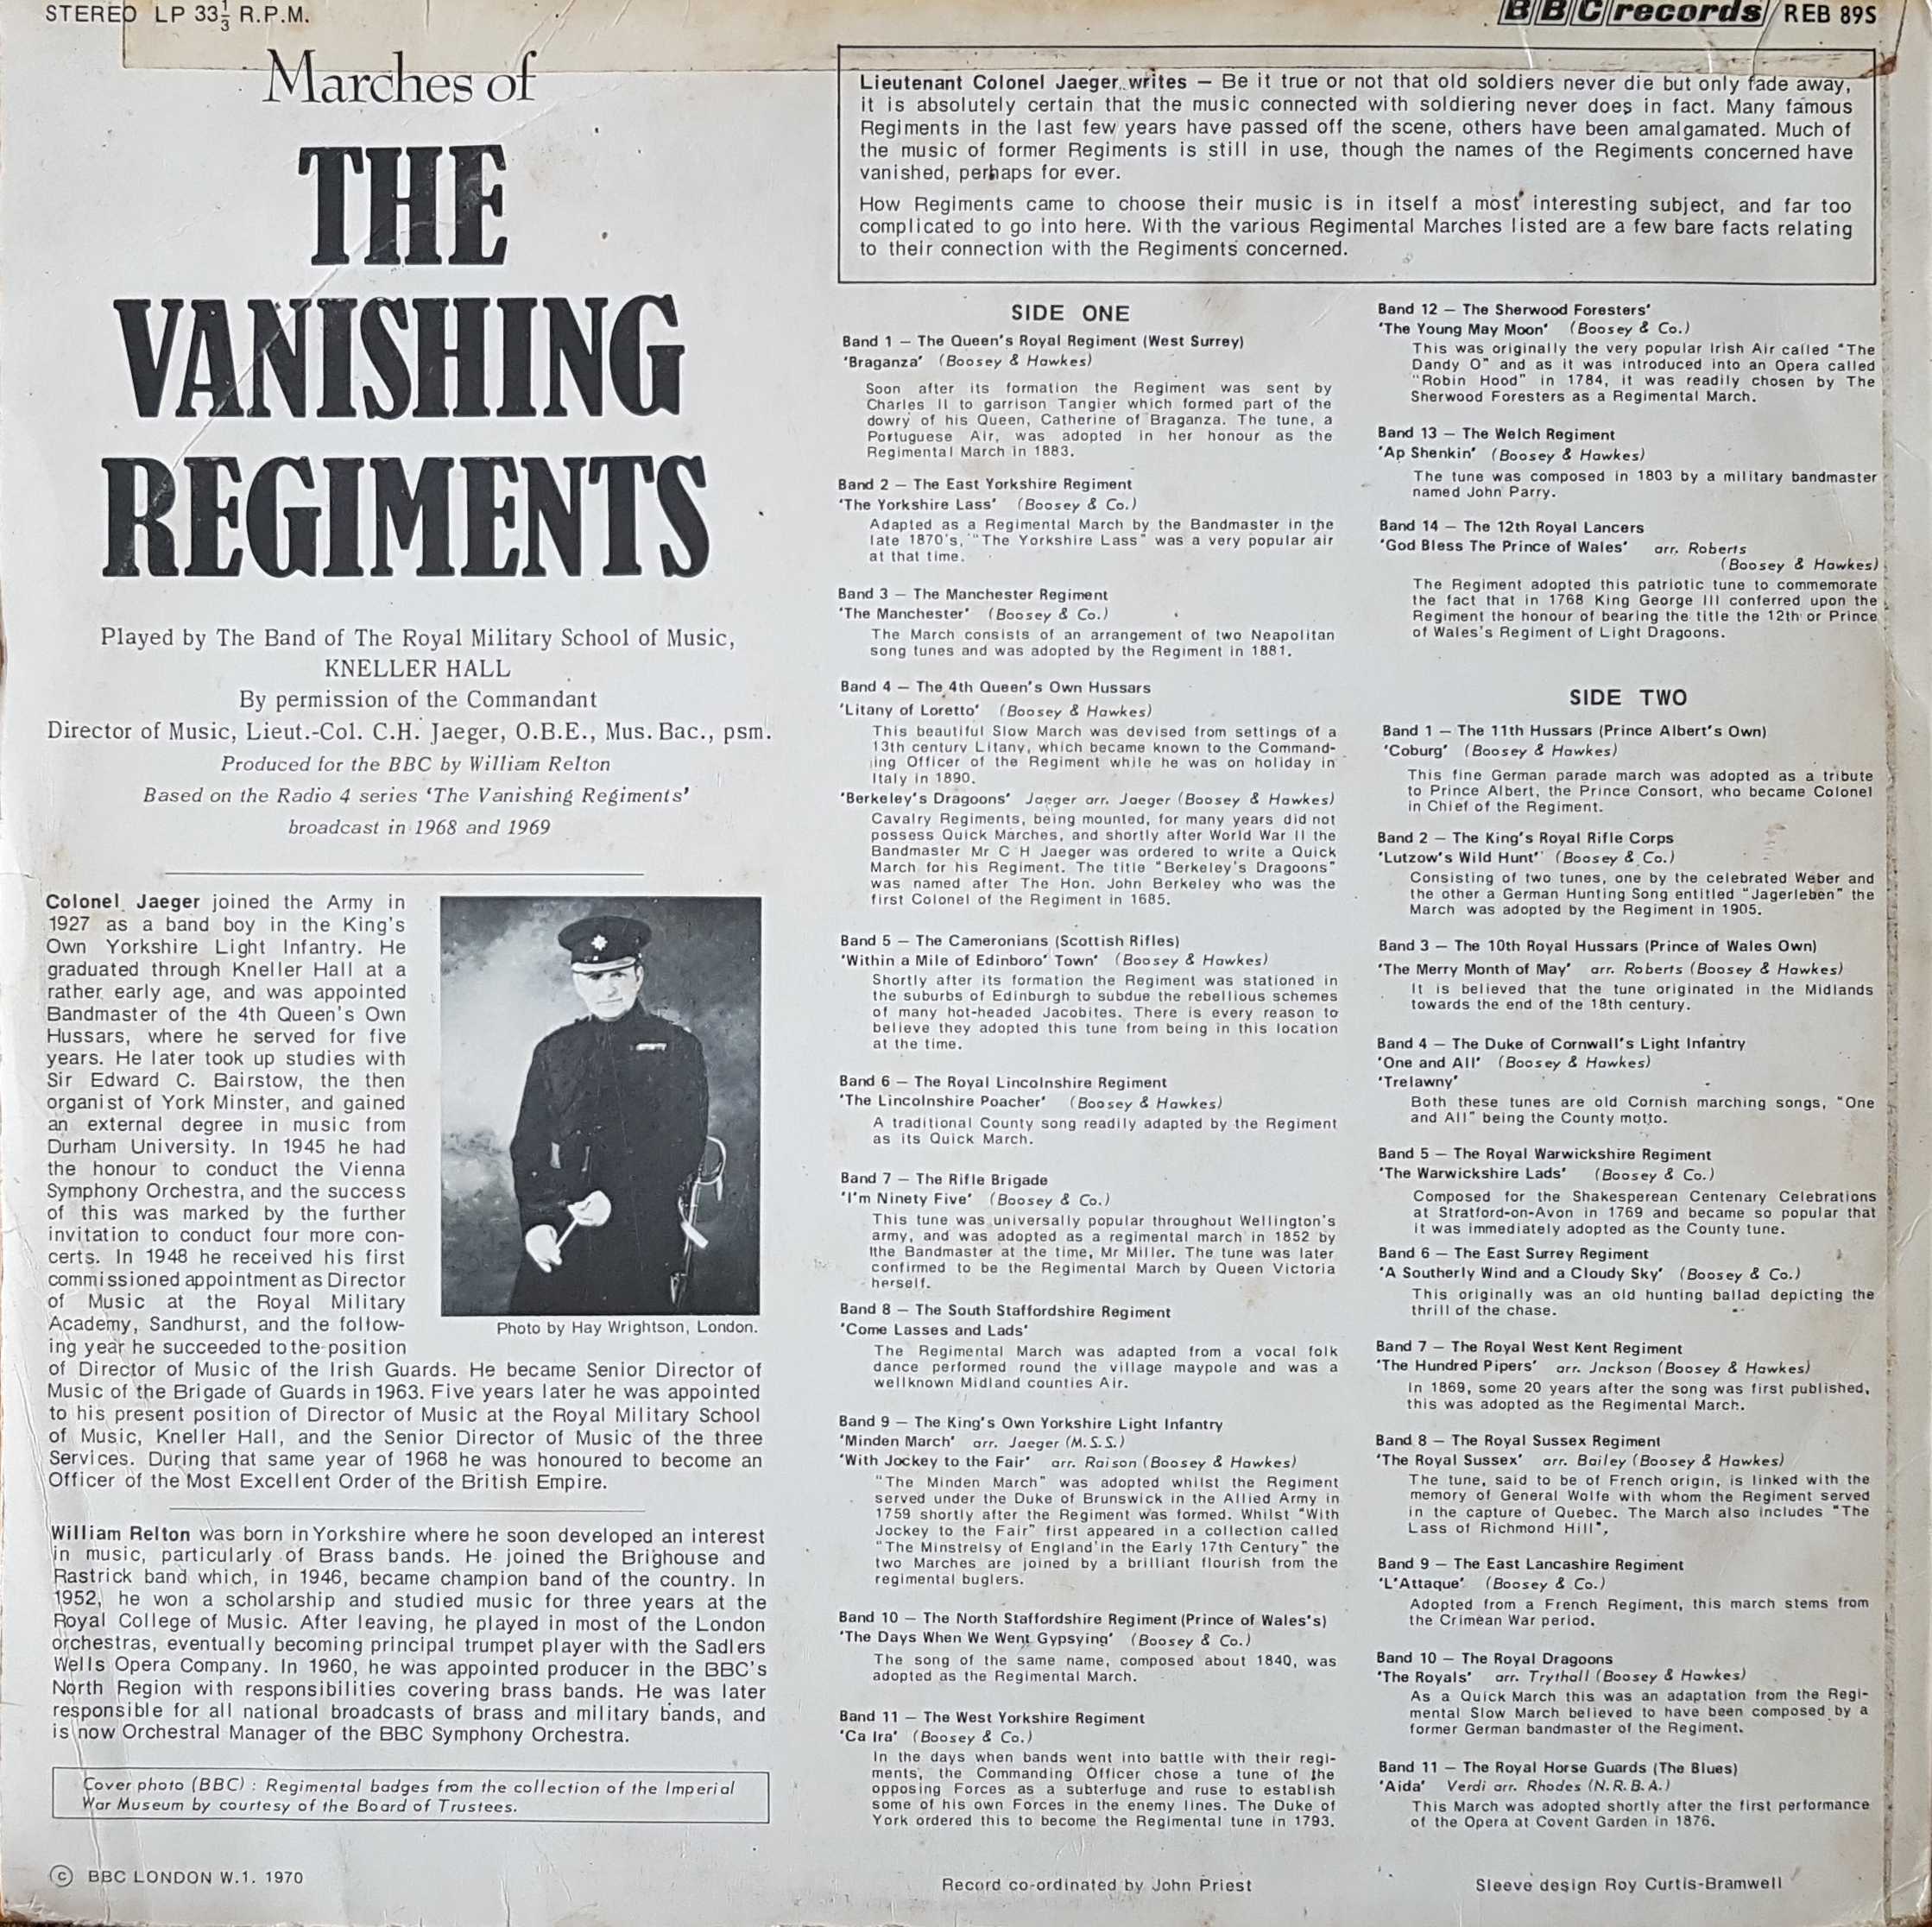 Picture of REB 89 The vanishing regiments by artist Various from the BBC records and Tapes library